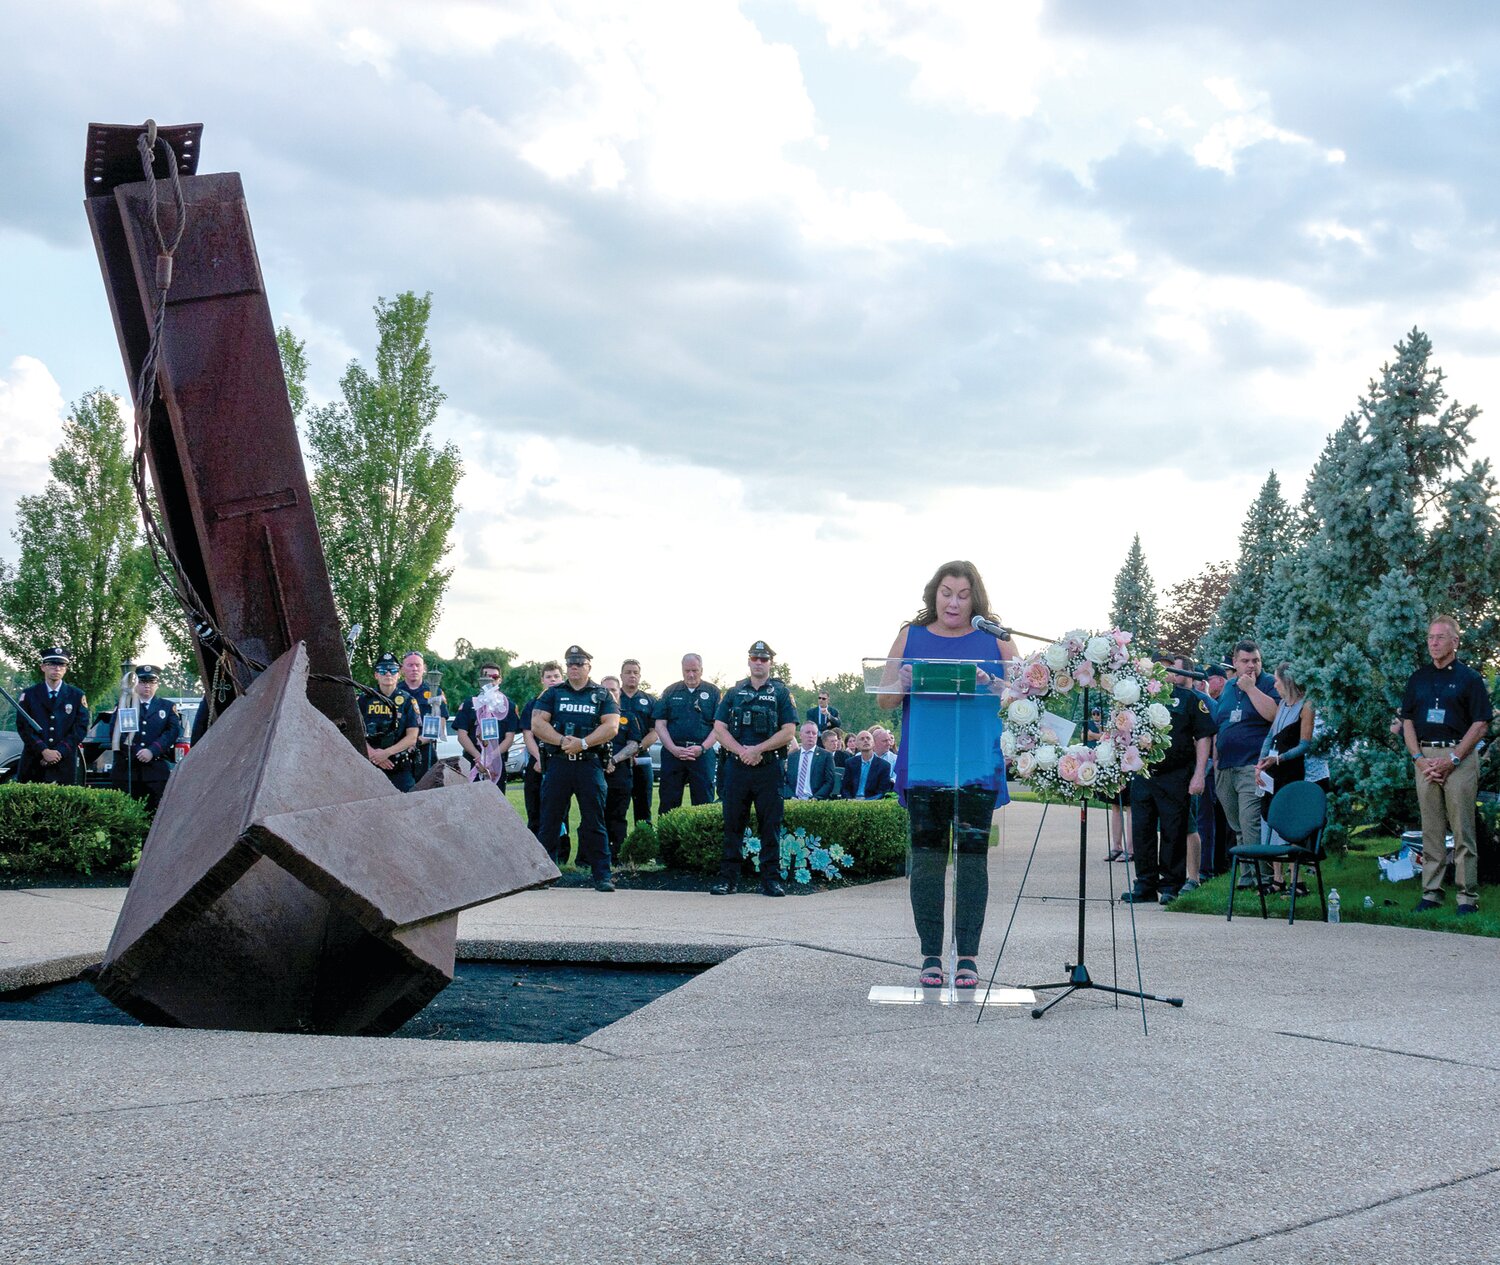 Ellen Saracini, chairman of 9-11 Memorial Garden of Reflection, speaks at the July 15 vigil for victims of the flash floods in Upper Makefield.